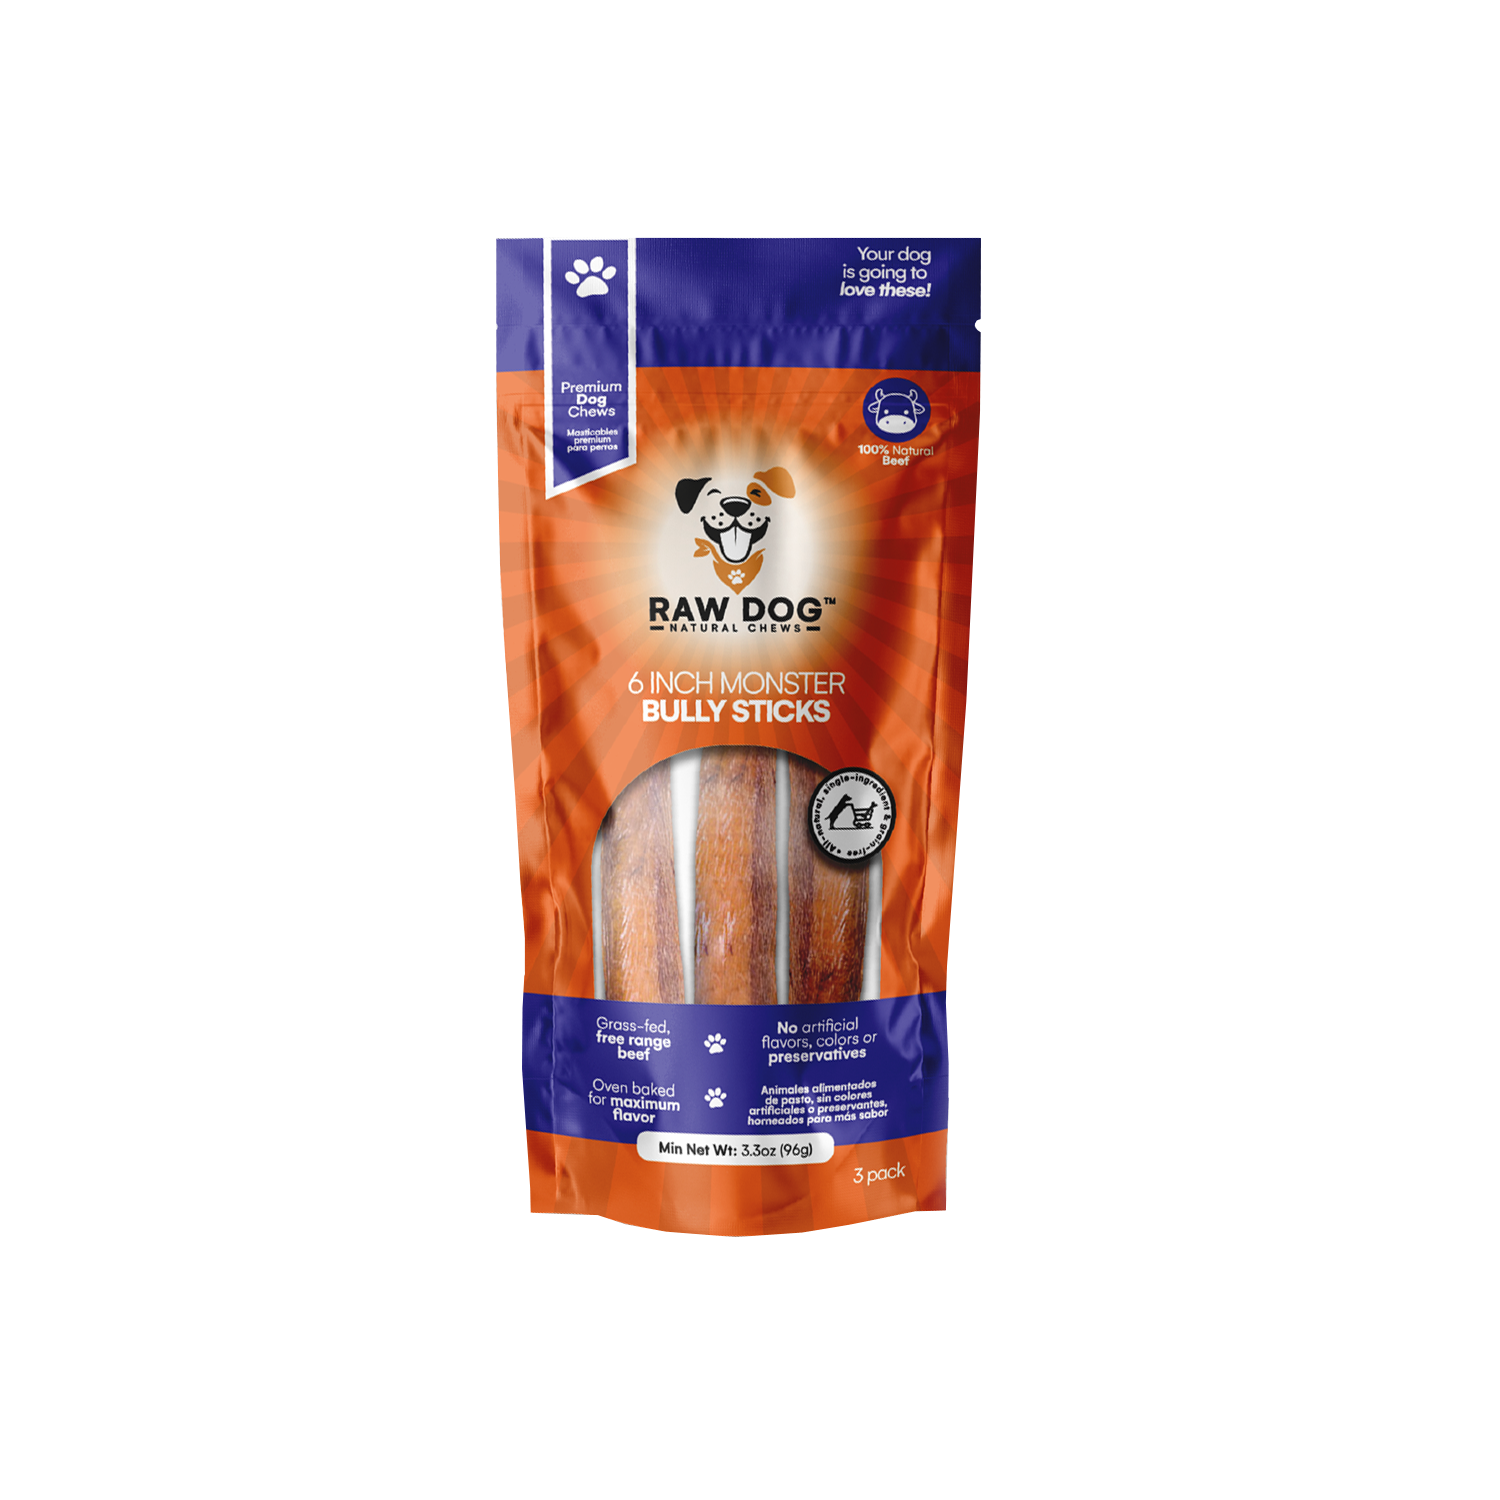 6" Monster Bully Stick (3 pack) - Raw Dog Chews